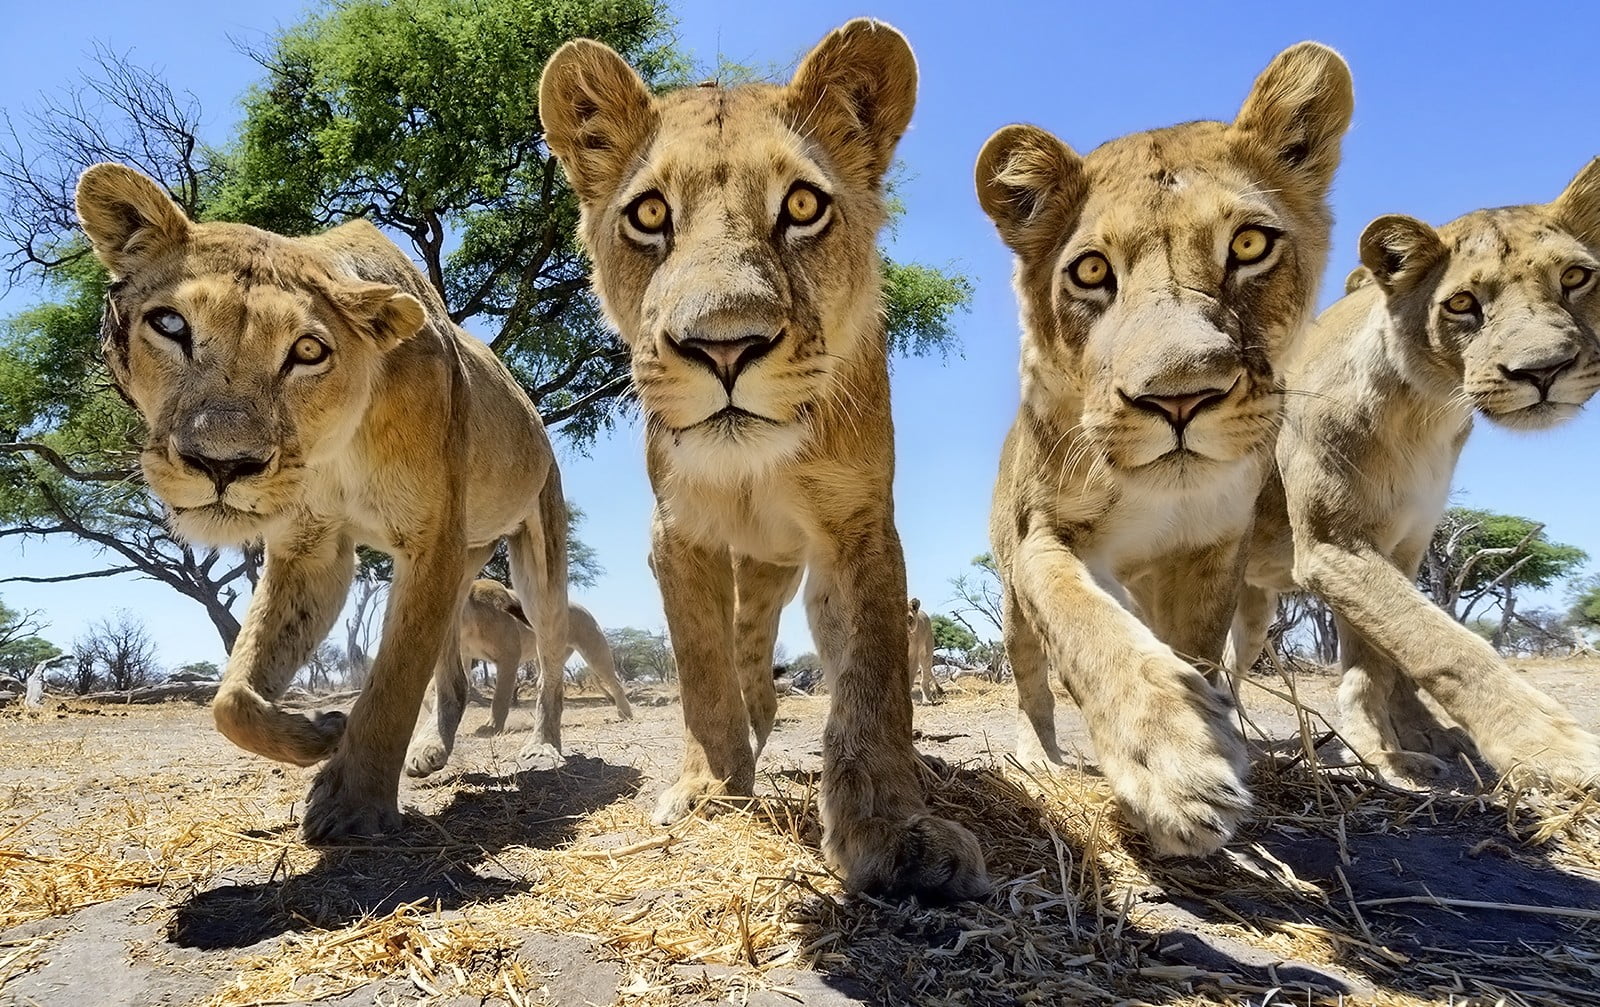 four brown cubs, lion, trees, big cats, Africa, wildlife, animals